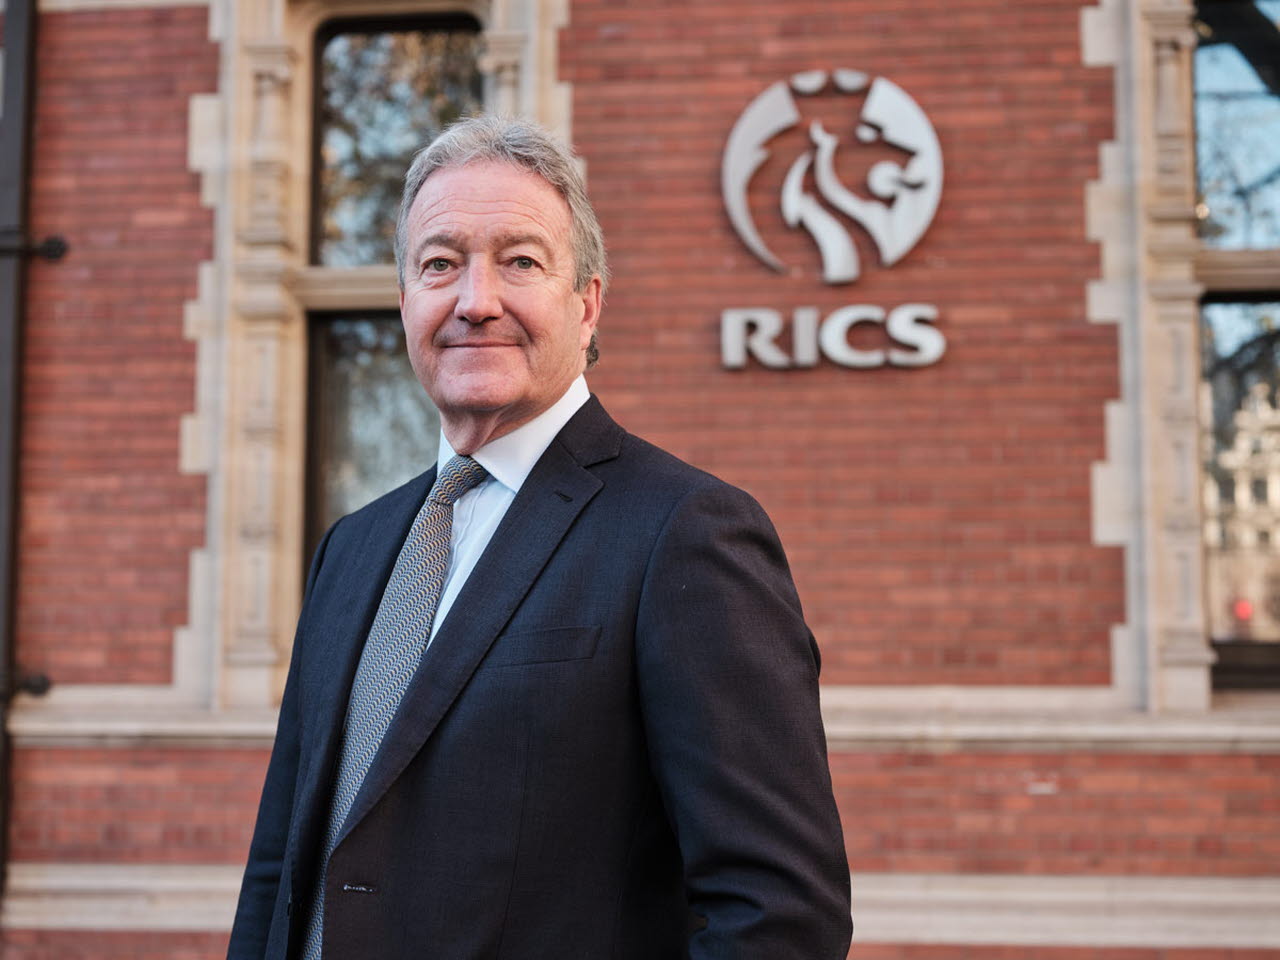 RICS appoints real estate veteran Justin Young as CEO